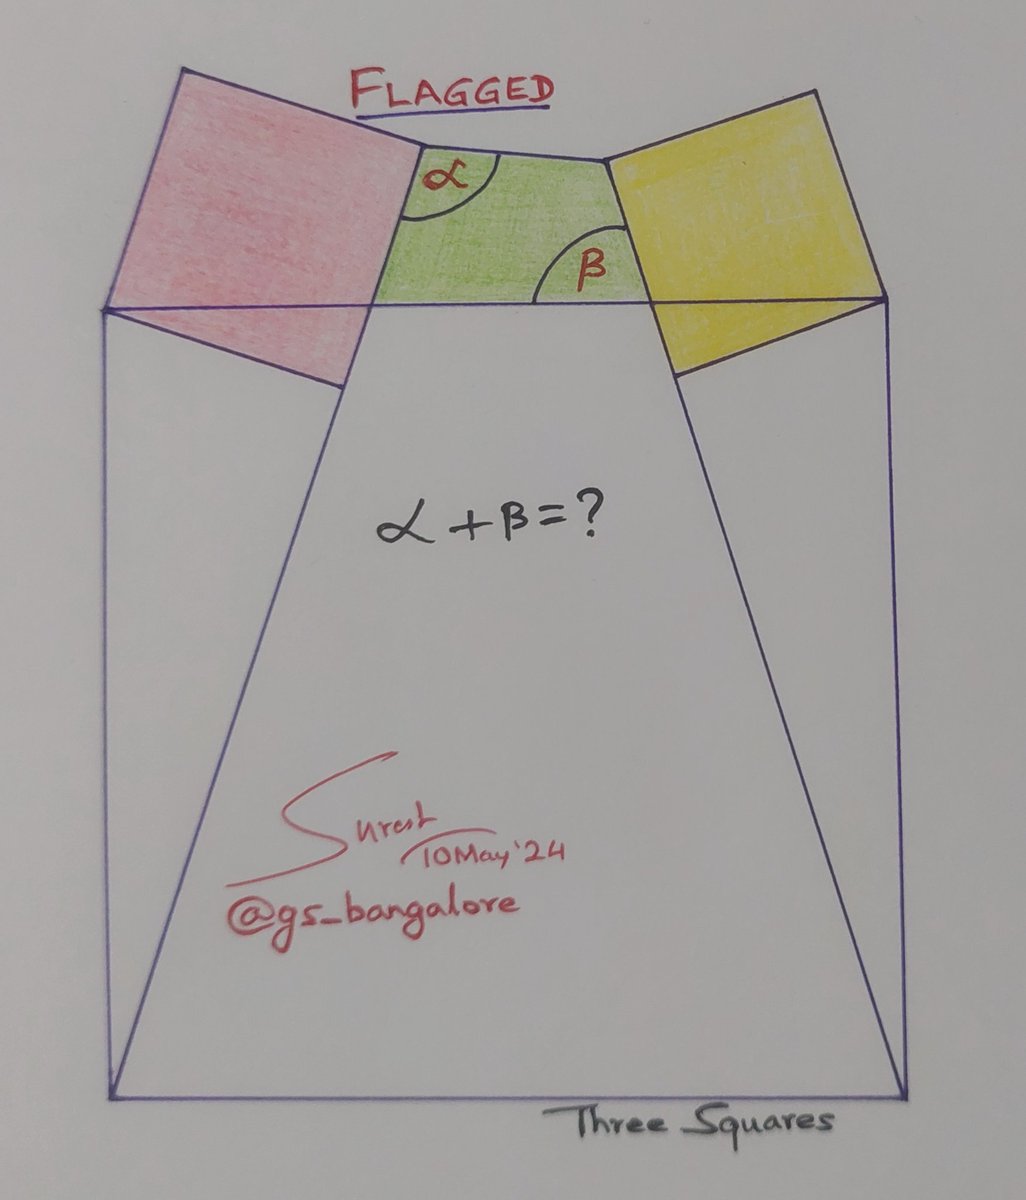 Flagged

Three squares in a configuration. Angles alpha + beta = ?

#square #triangle #quadrilateral #geometry #geometrique #study #riddle #puzzle #cyclic #thinking #logic #reasoning #today #circle #mathteachers #math #teacher #mathematics #Algebra #highschool #students #learning